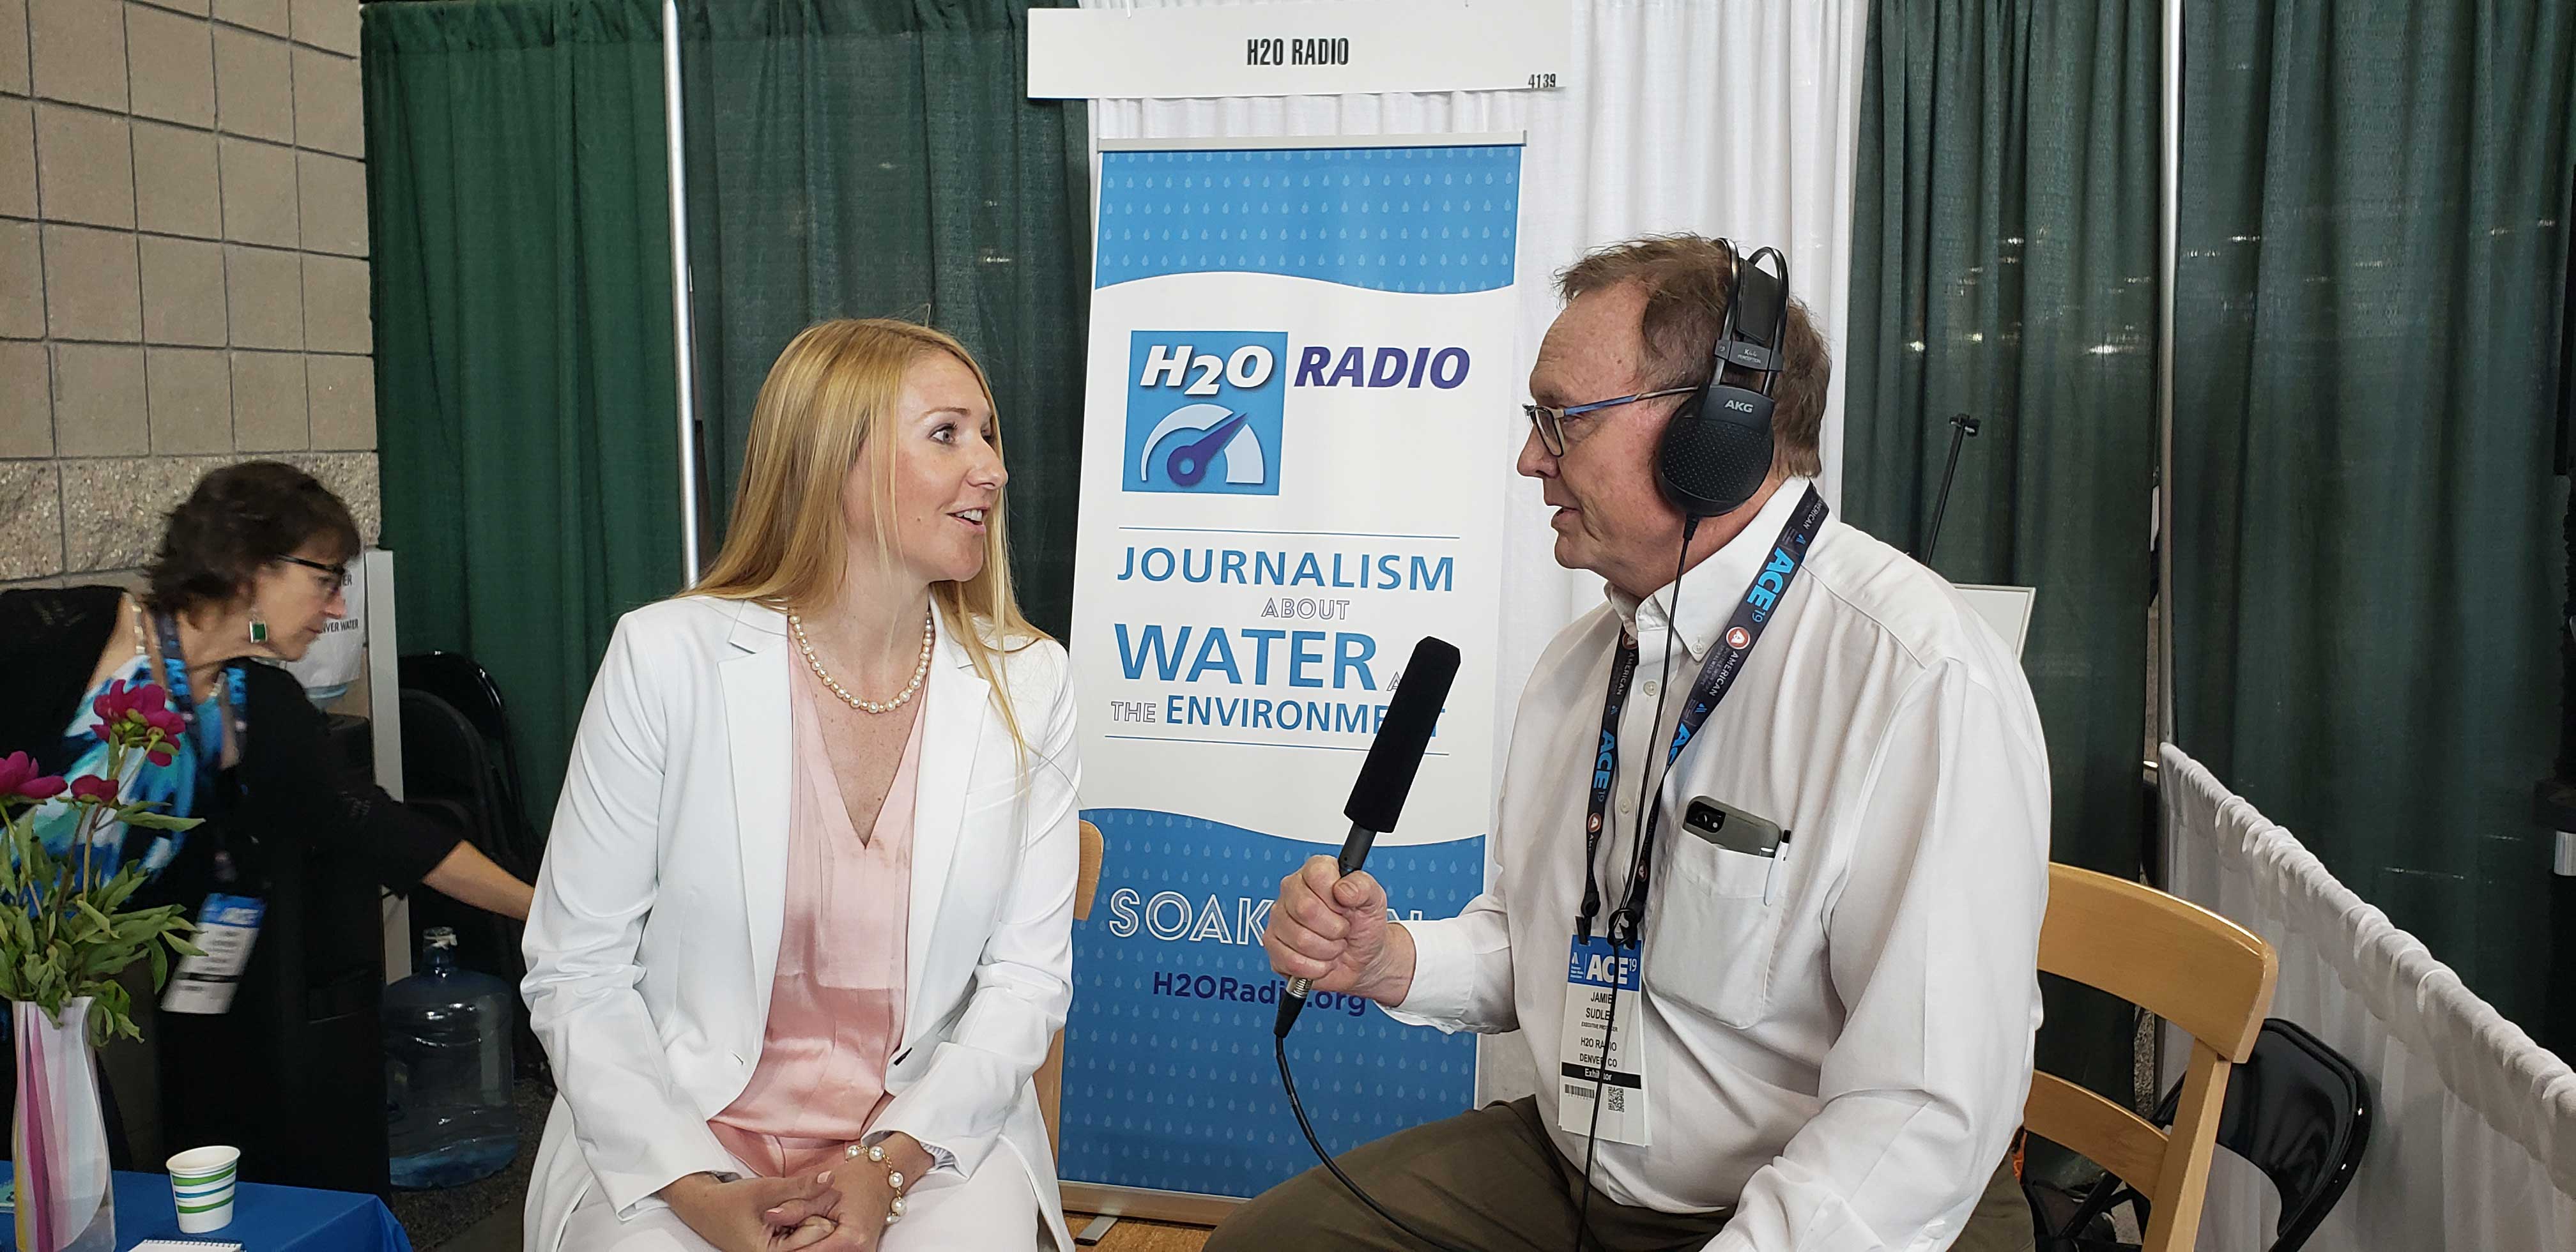 A woman talks with a man who is wearing radio headphones and carryhing a large microphone. IN the background is hte banner: H20 Radio, Journalism about Water and the Environment.